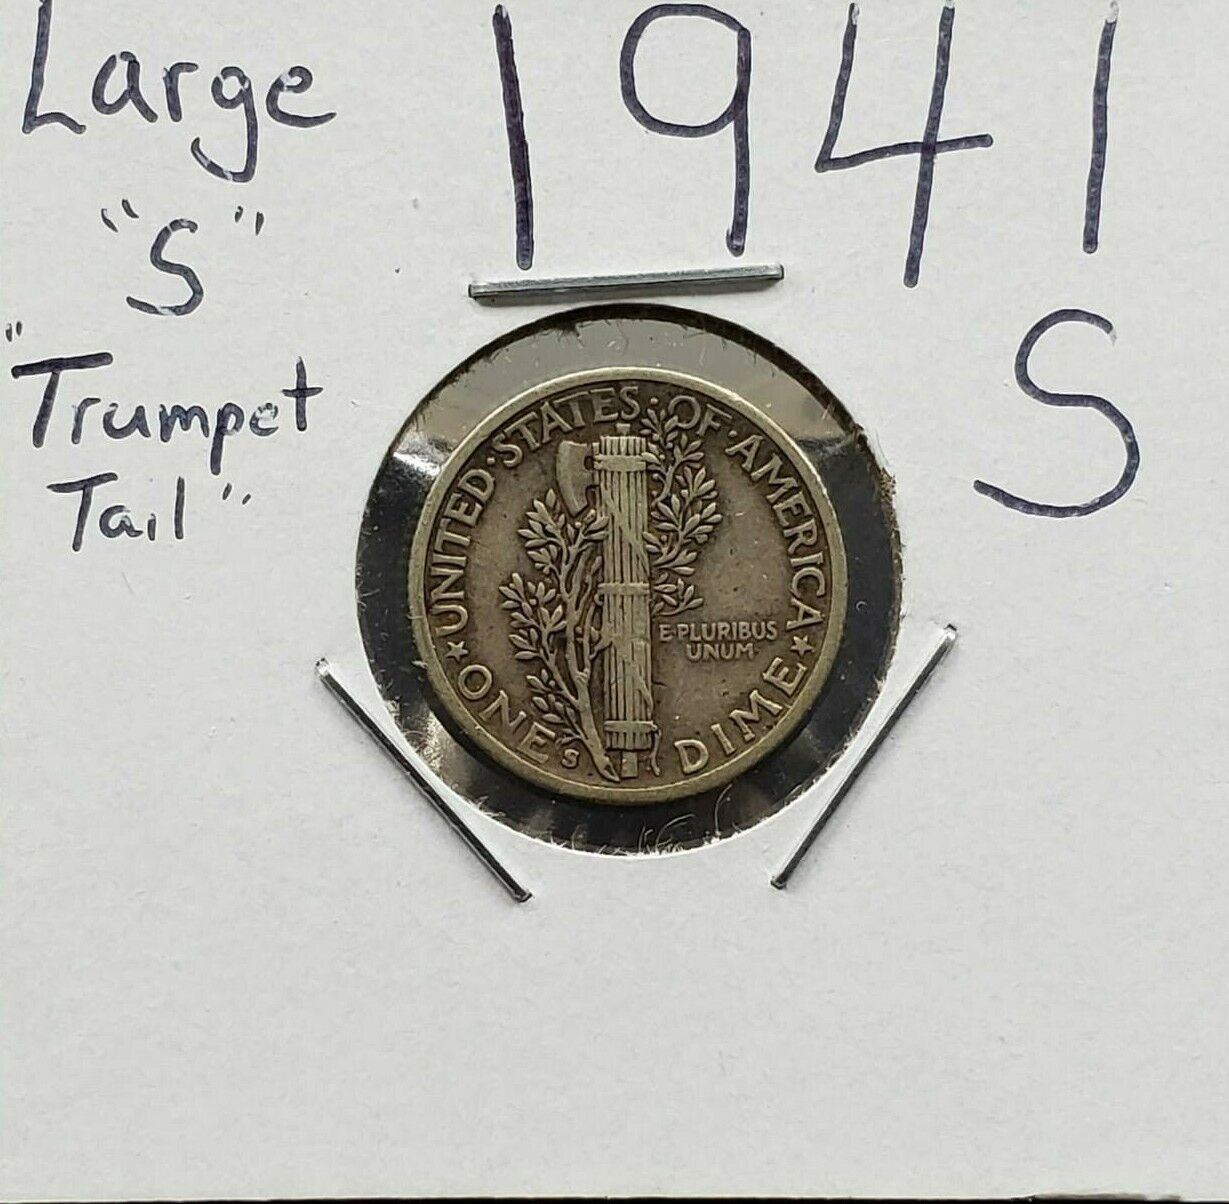 1941 S Mercury Silver Dime Coin Quad Circ Variety Trumpet Tail Large S Mint Mark